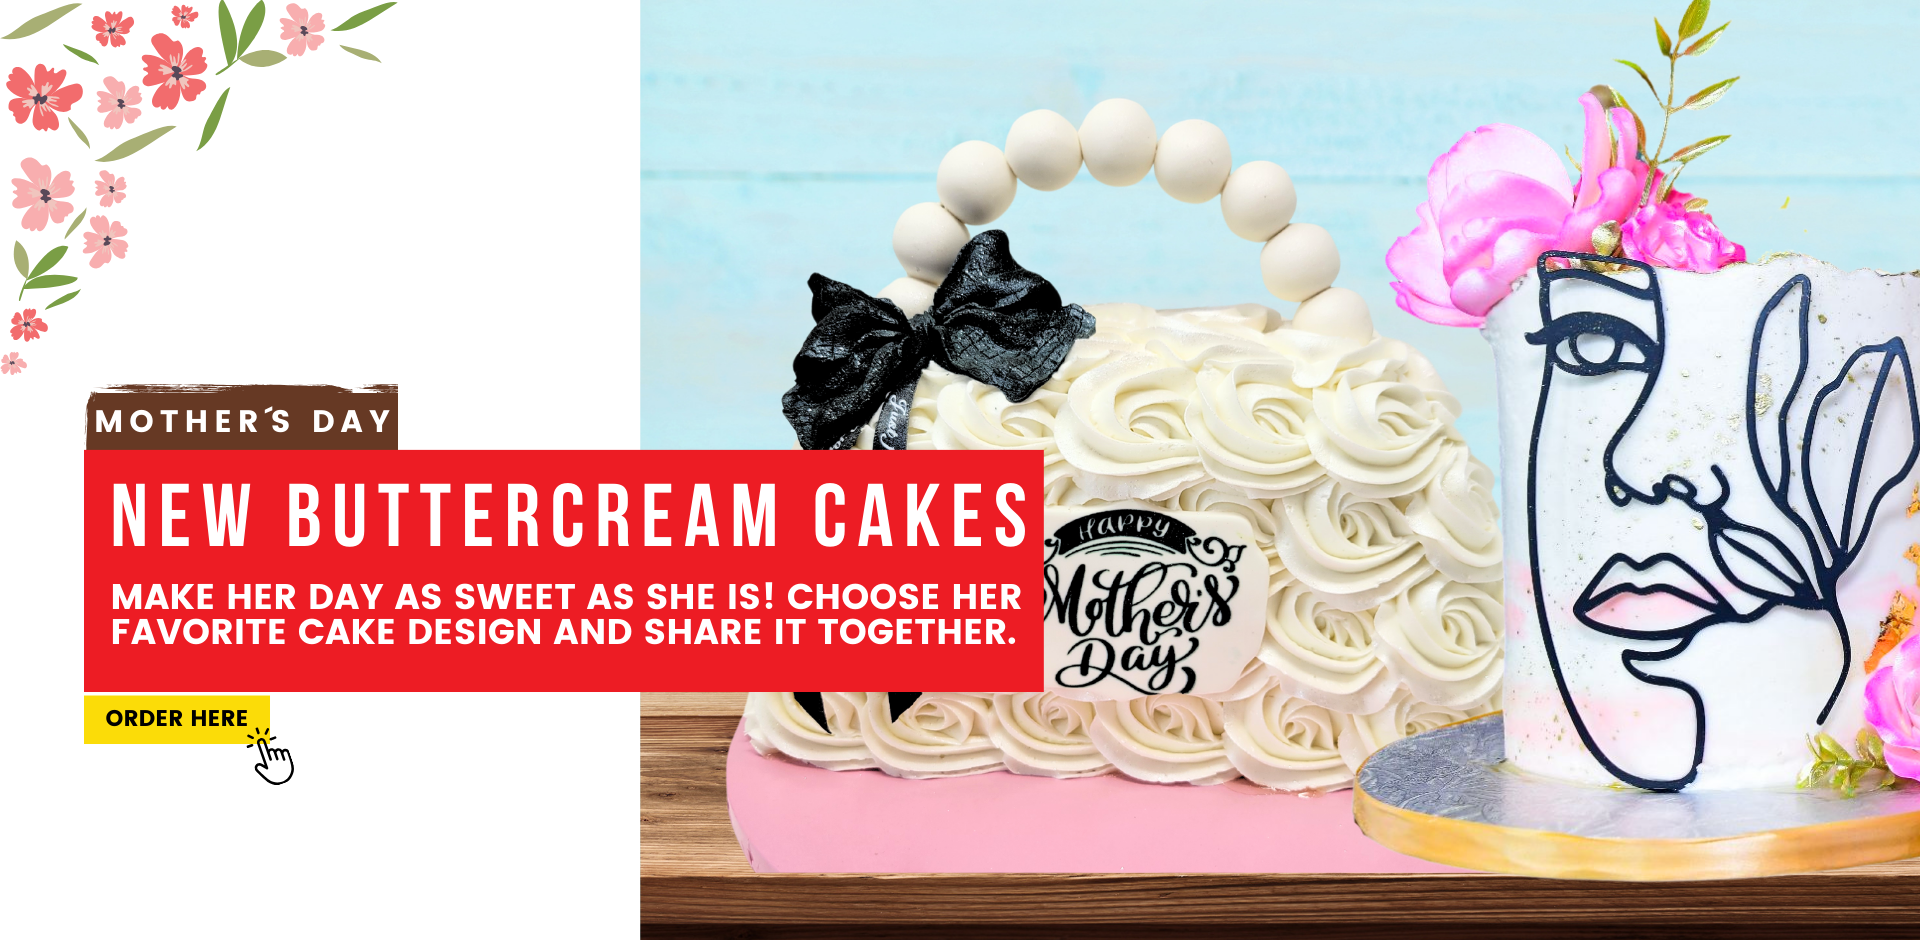 Mother's Day. new buttercream cakes. Make her day as sweet as she is! Choose her favorite cake design and share it together. Order here